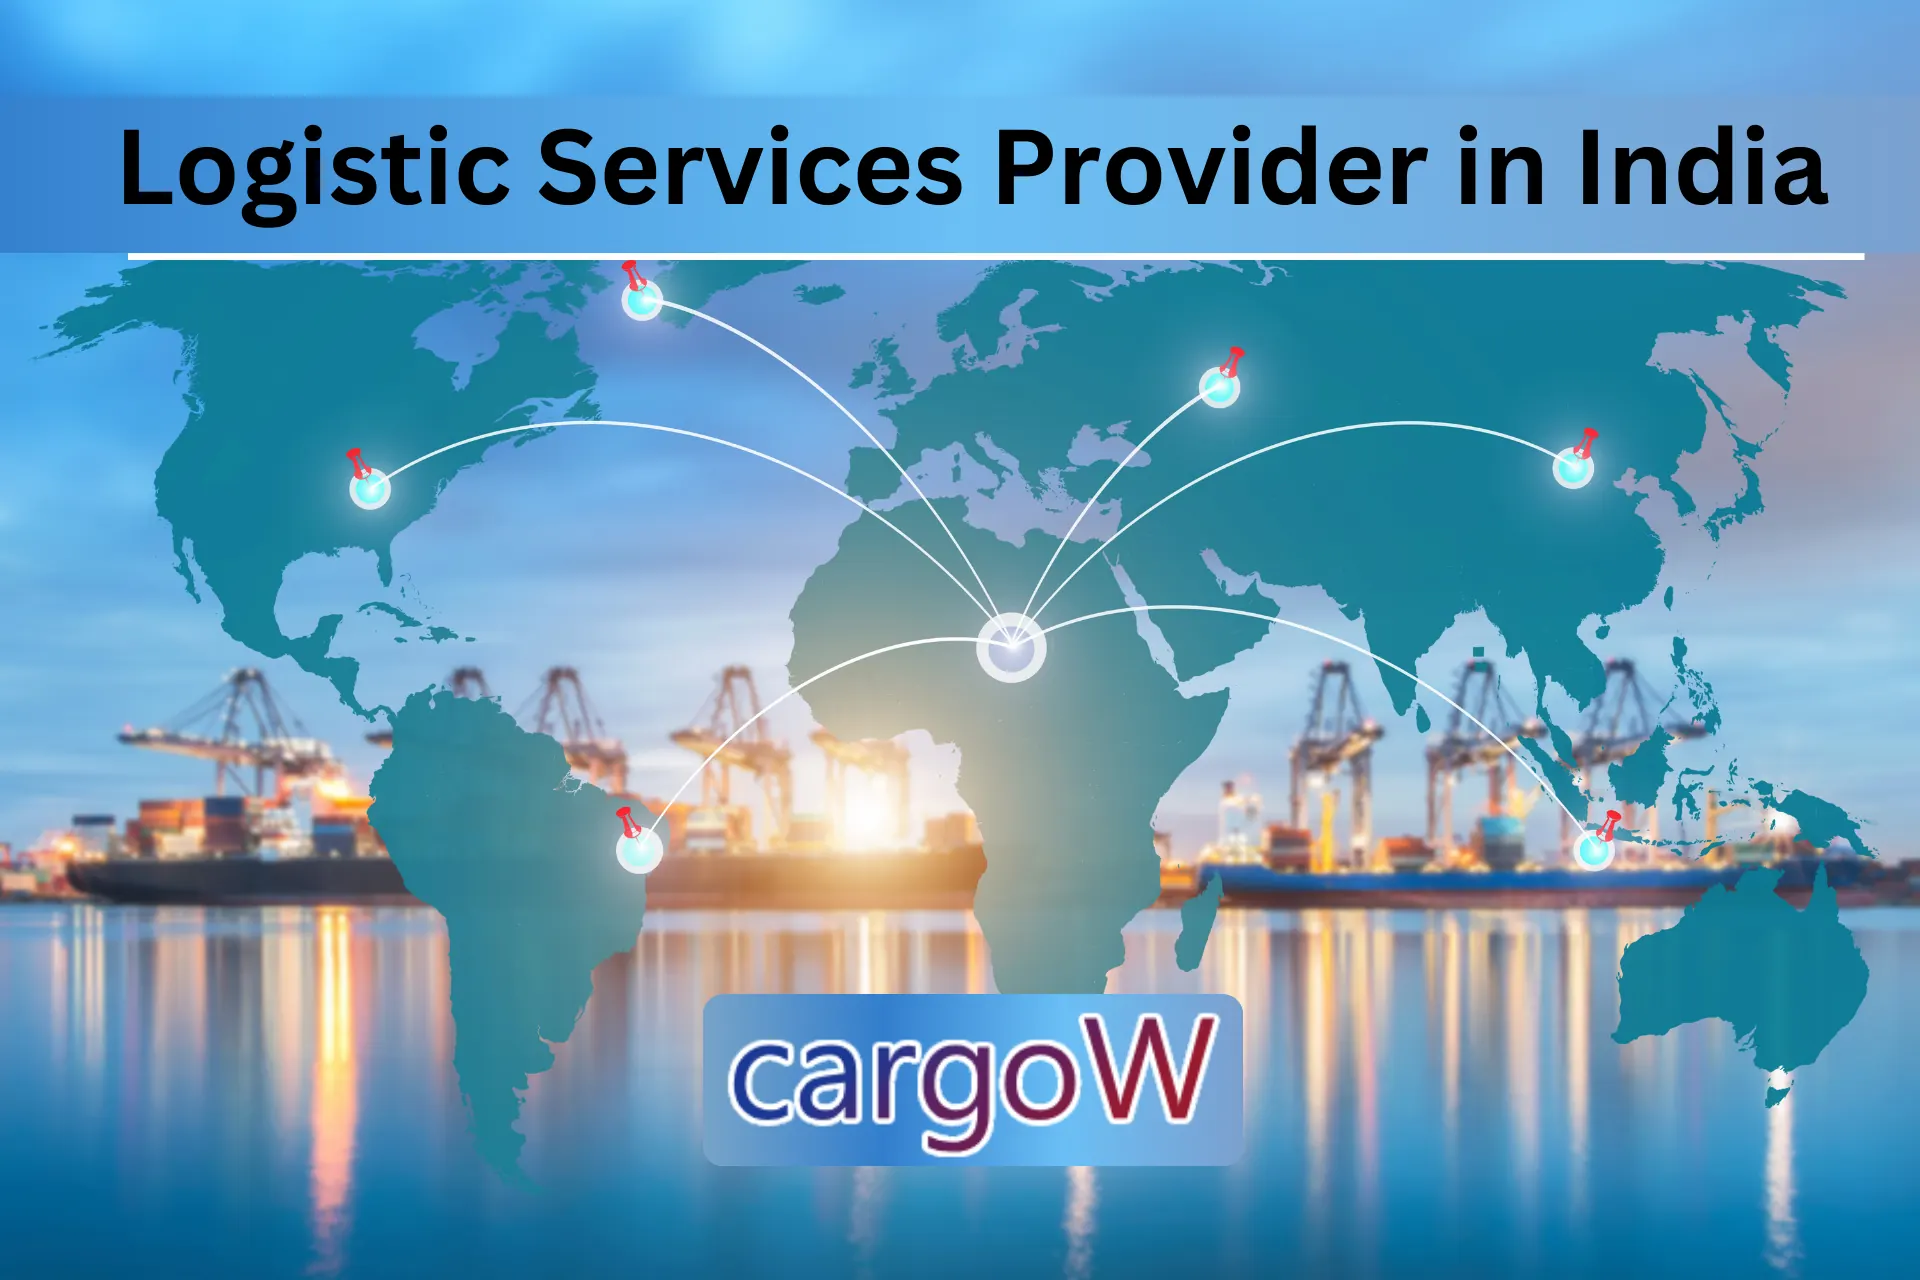 Cargow Logistic Services Provider in India